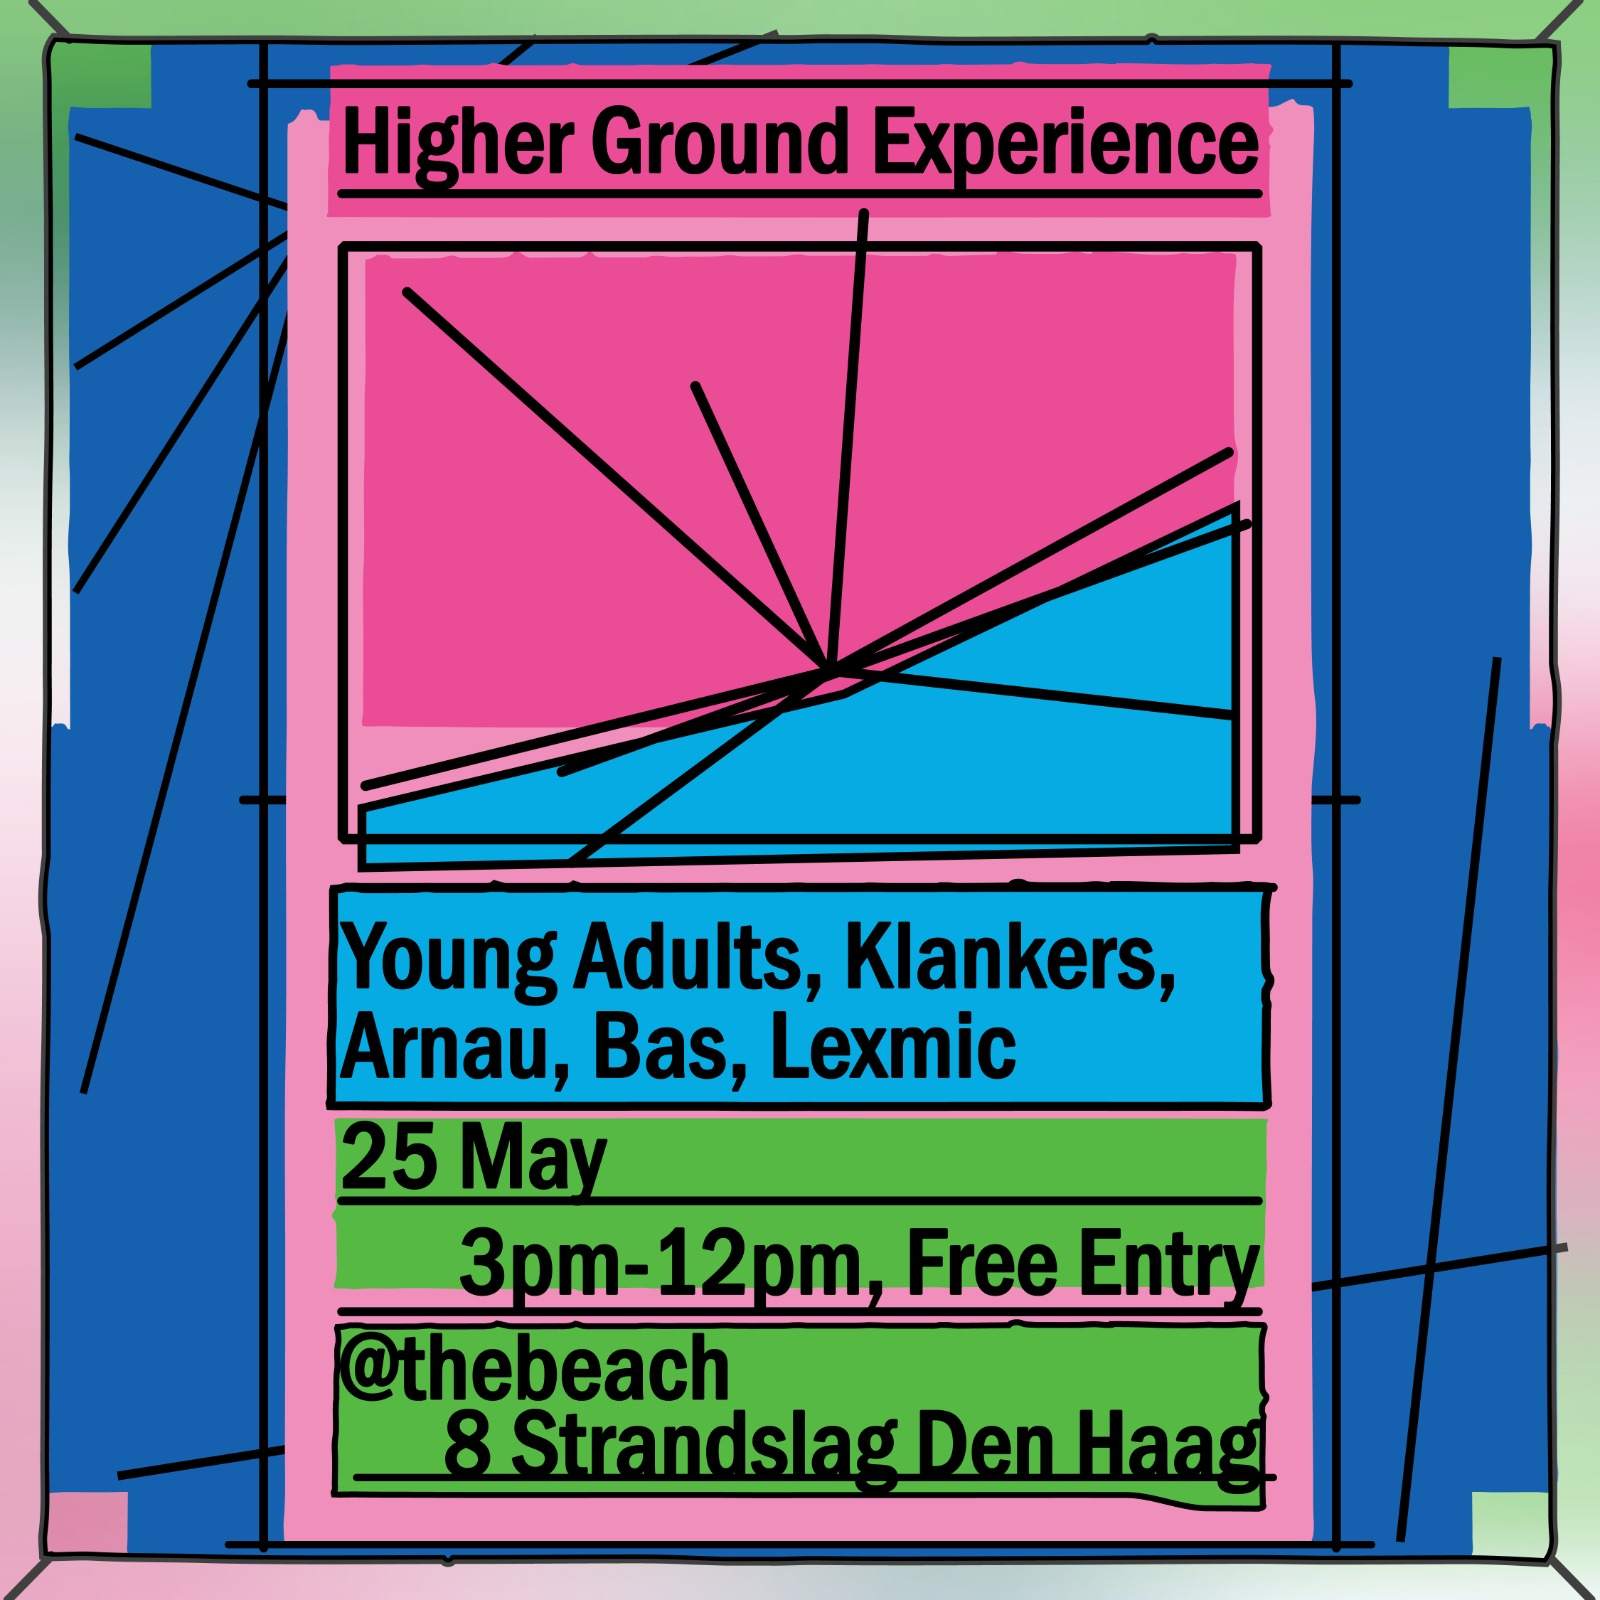 Higher Ground Experience - Free Beach Party - Página frontal